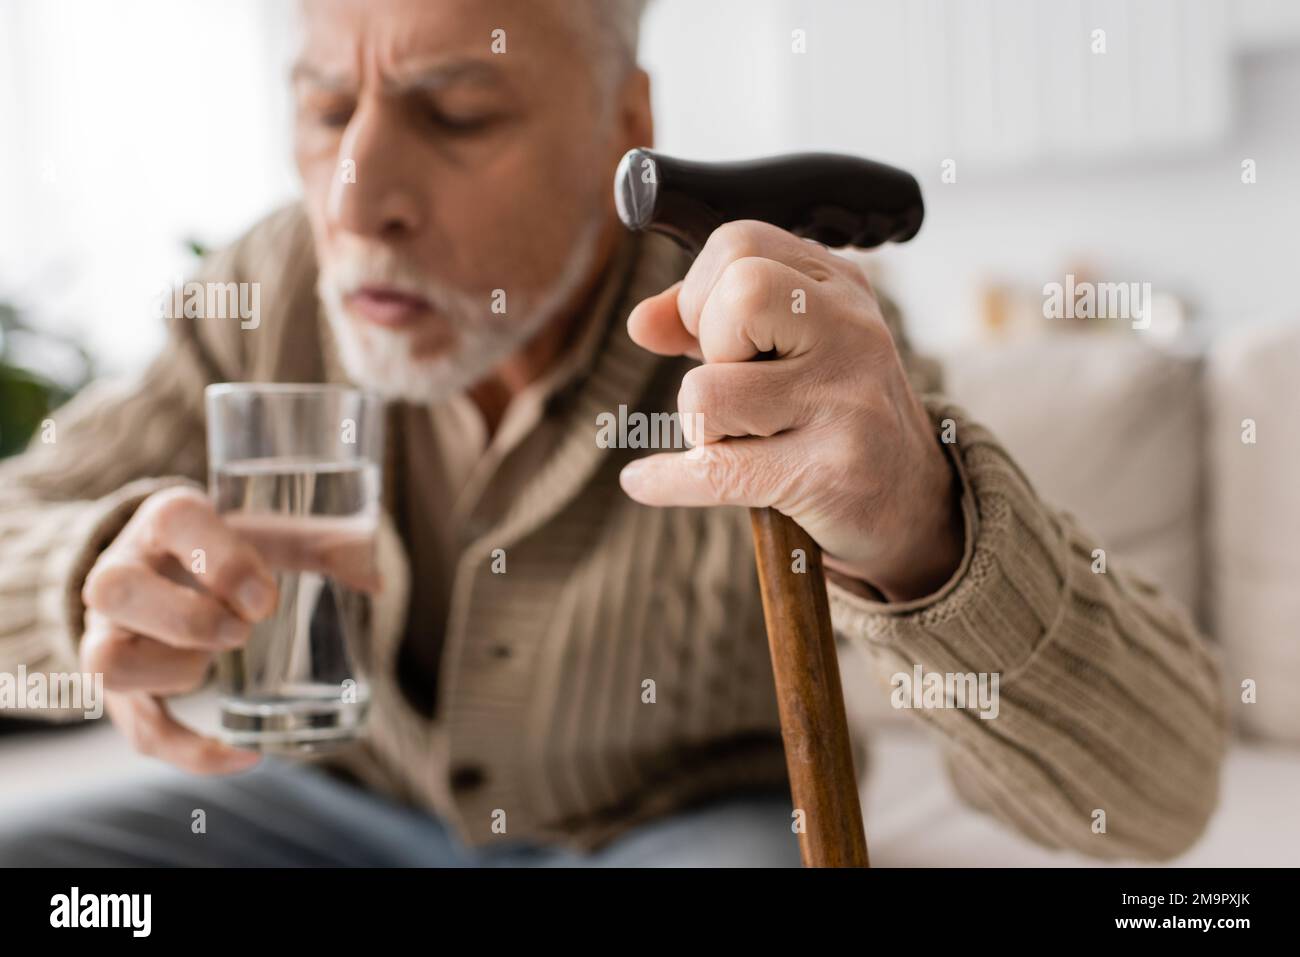 blurred man with parkinsonian syndrome holding walking cane and glass of water in trembling hands,stock image Stock Photo